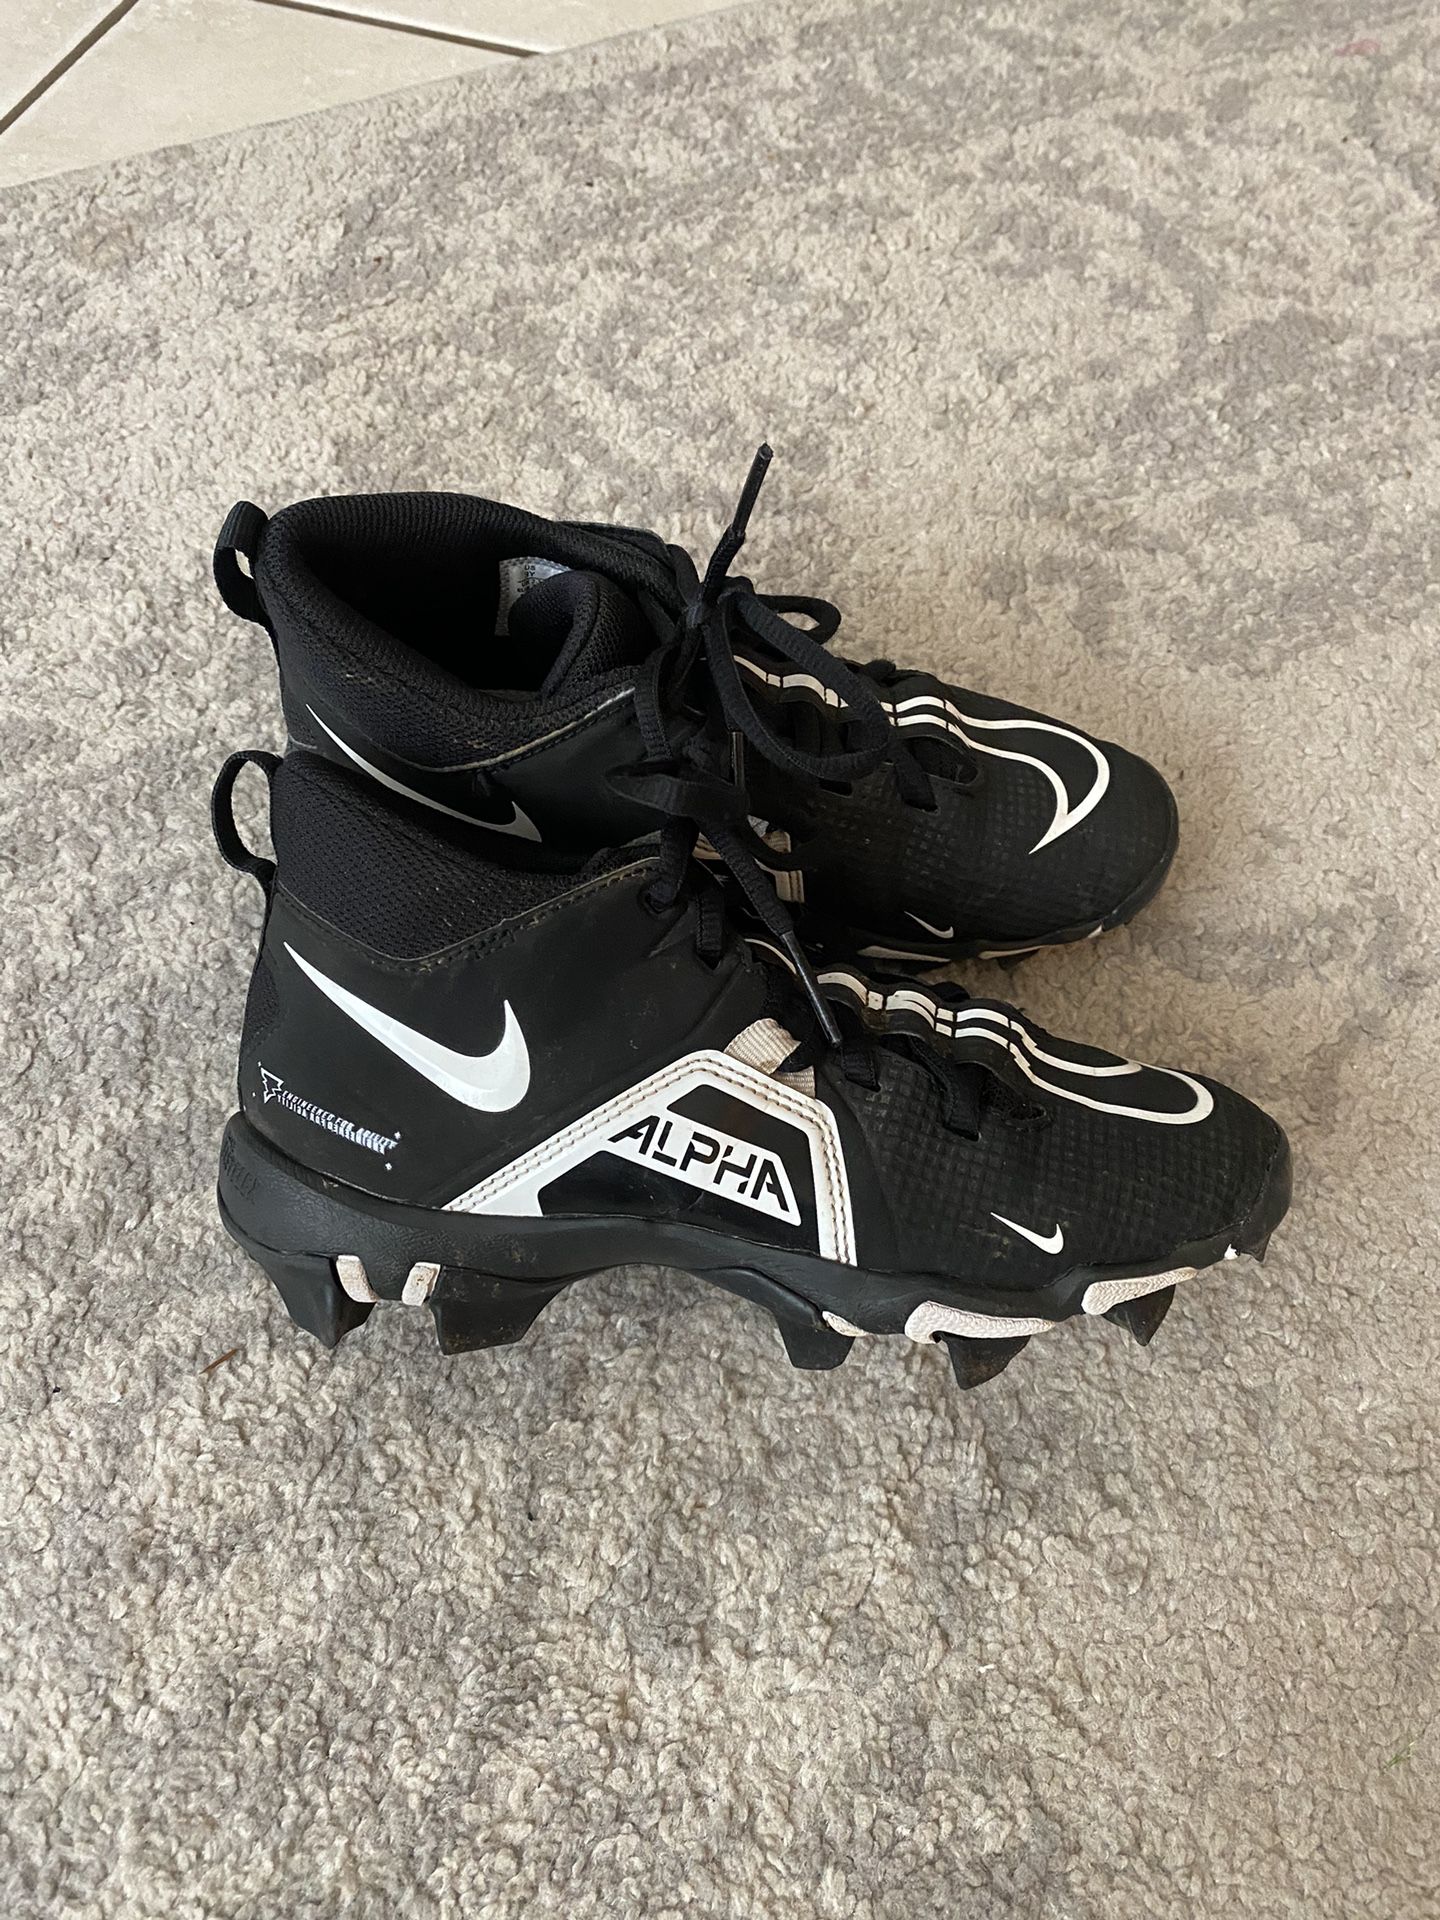 Boys Nike football Cleats. 3Y for Sale in Gresham, OR - OfferUp